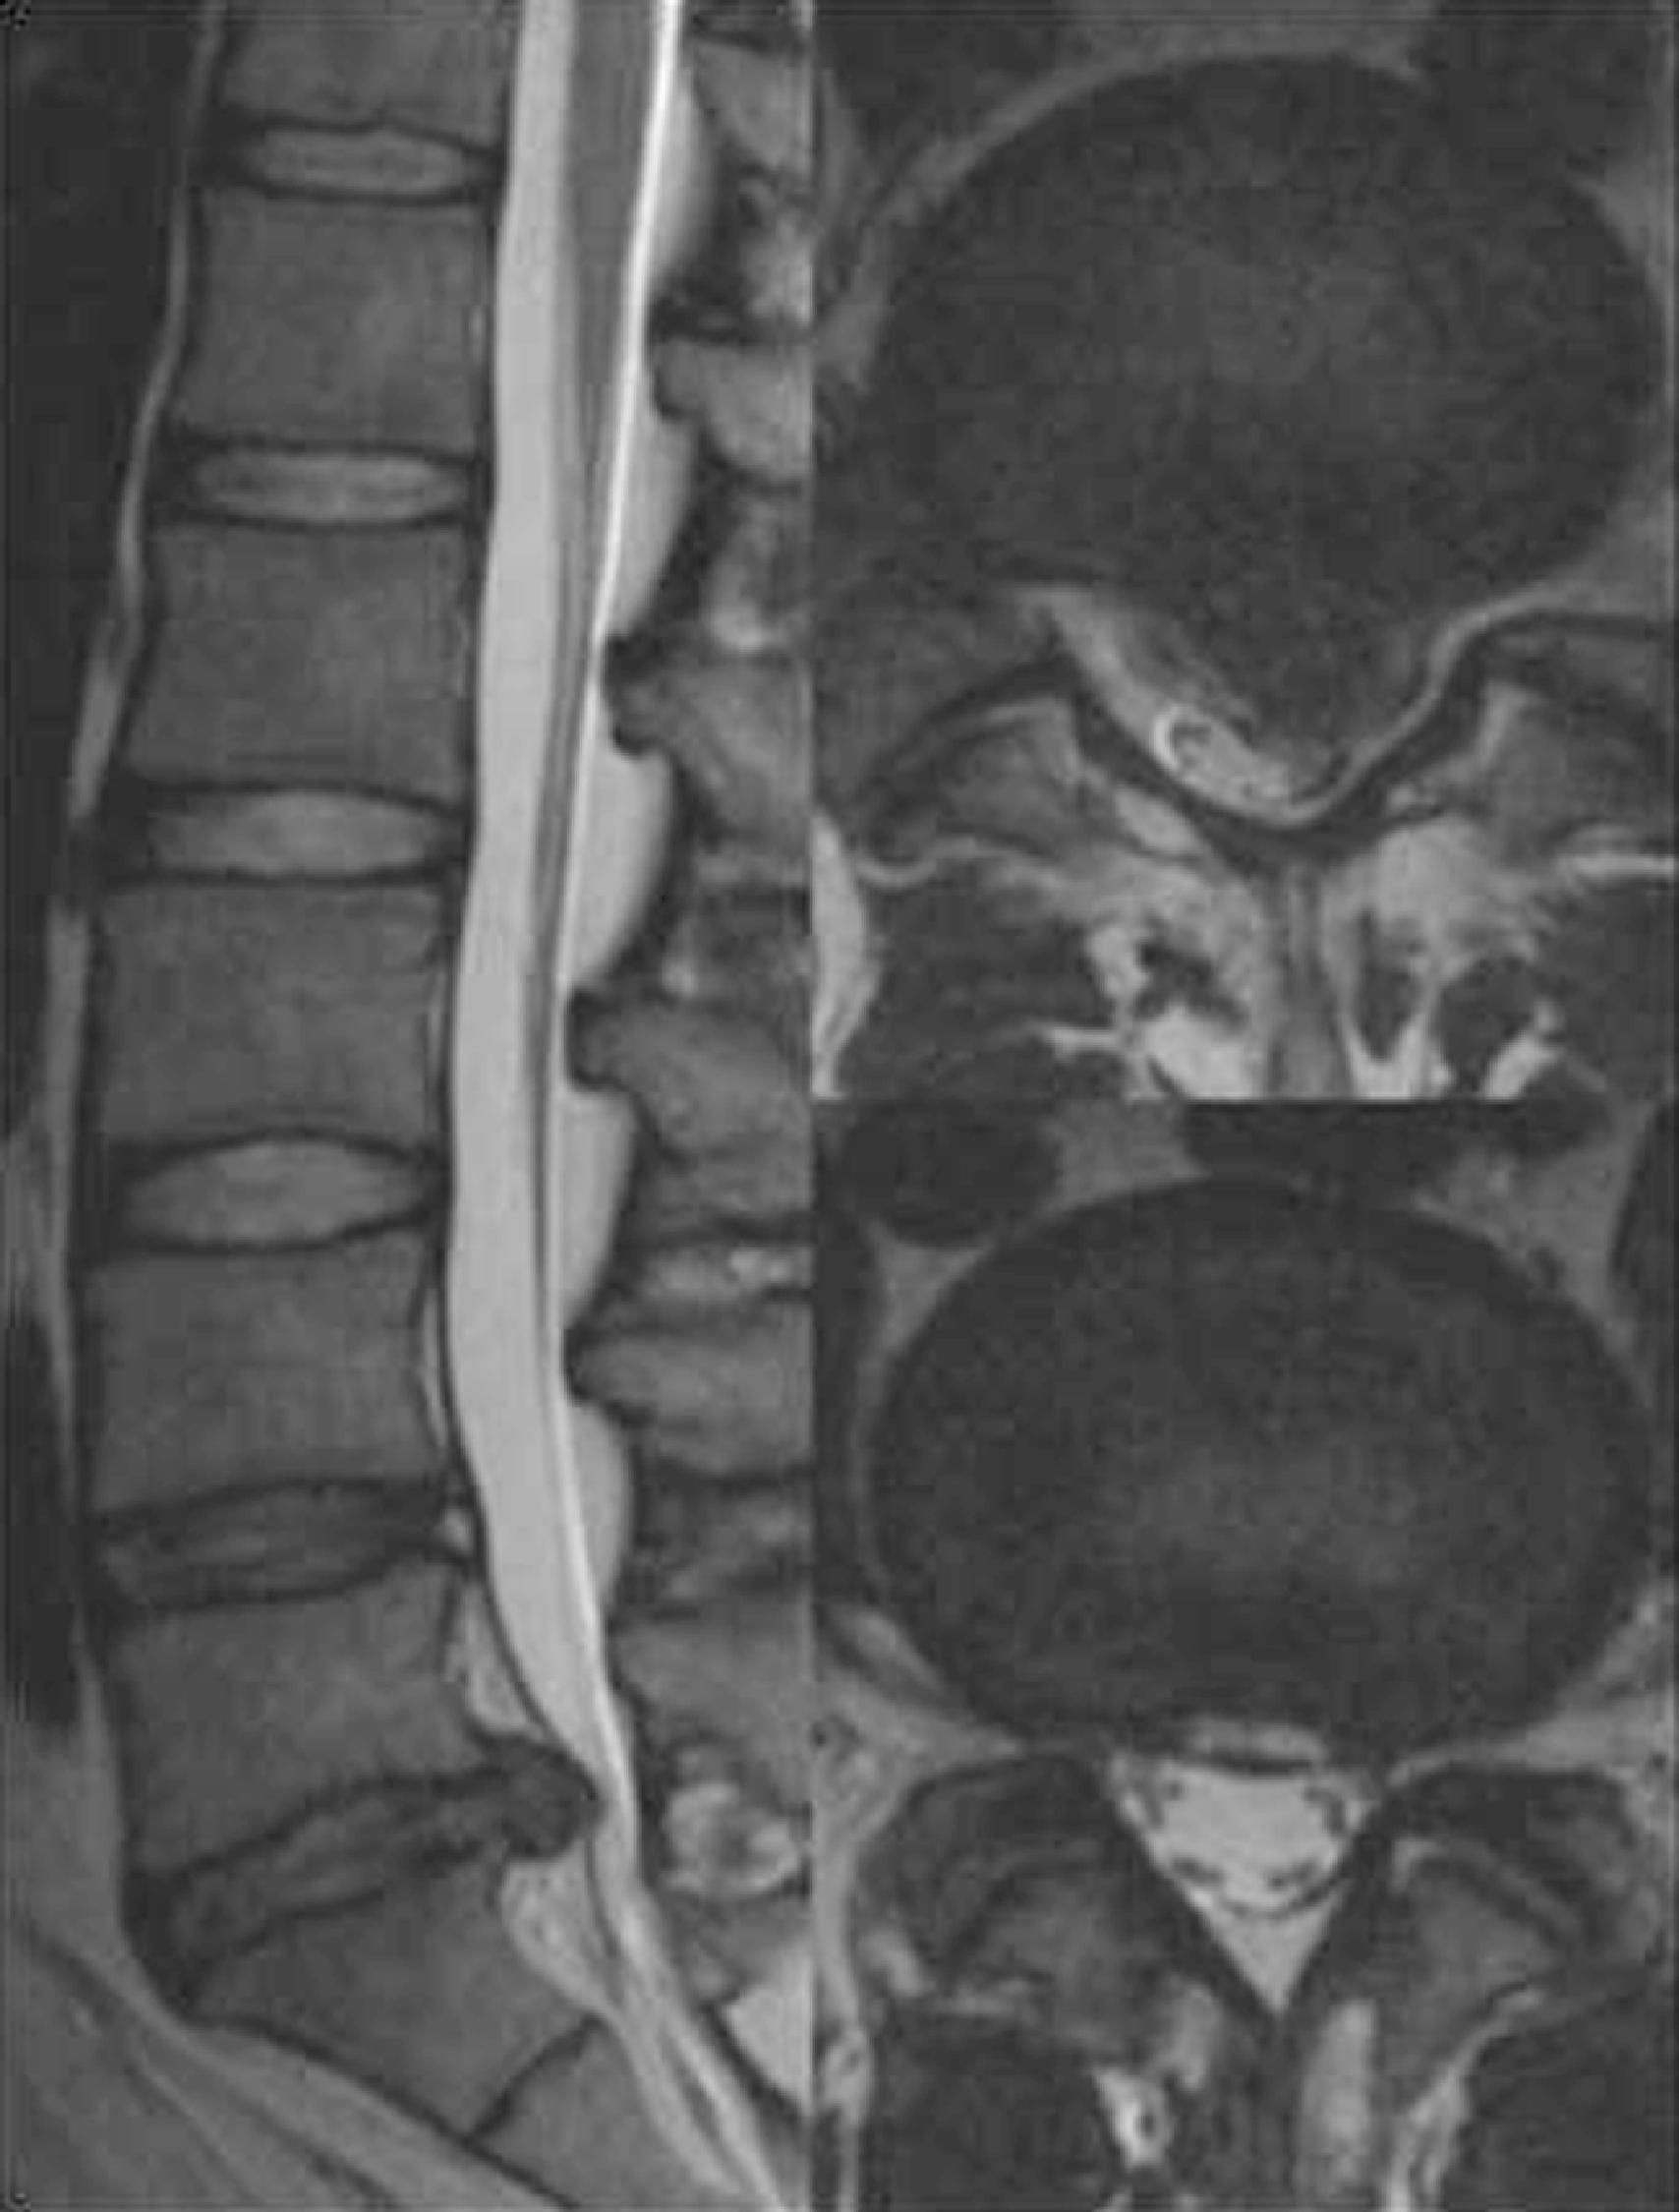 Figure 29.4 T2-weighted sagittal magnetic resonance images of a 31-year-old man with severe axial and lower extremity pain showing two distinct disk pathologies. At the L5-S1 level, there is left-sided disk extrusion, and the L4-5 disk shows desiccation and a high-intensity zone; the remaining disks appear normal.